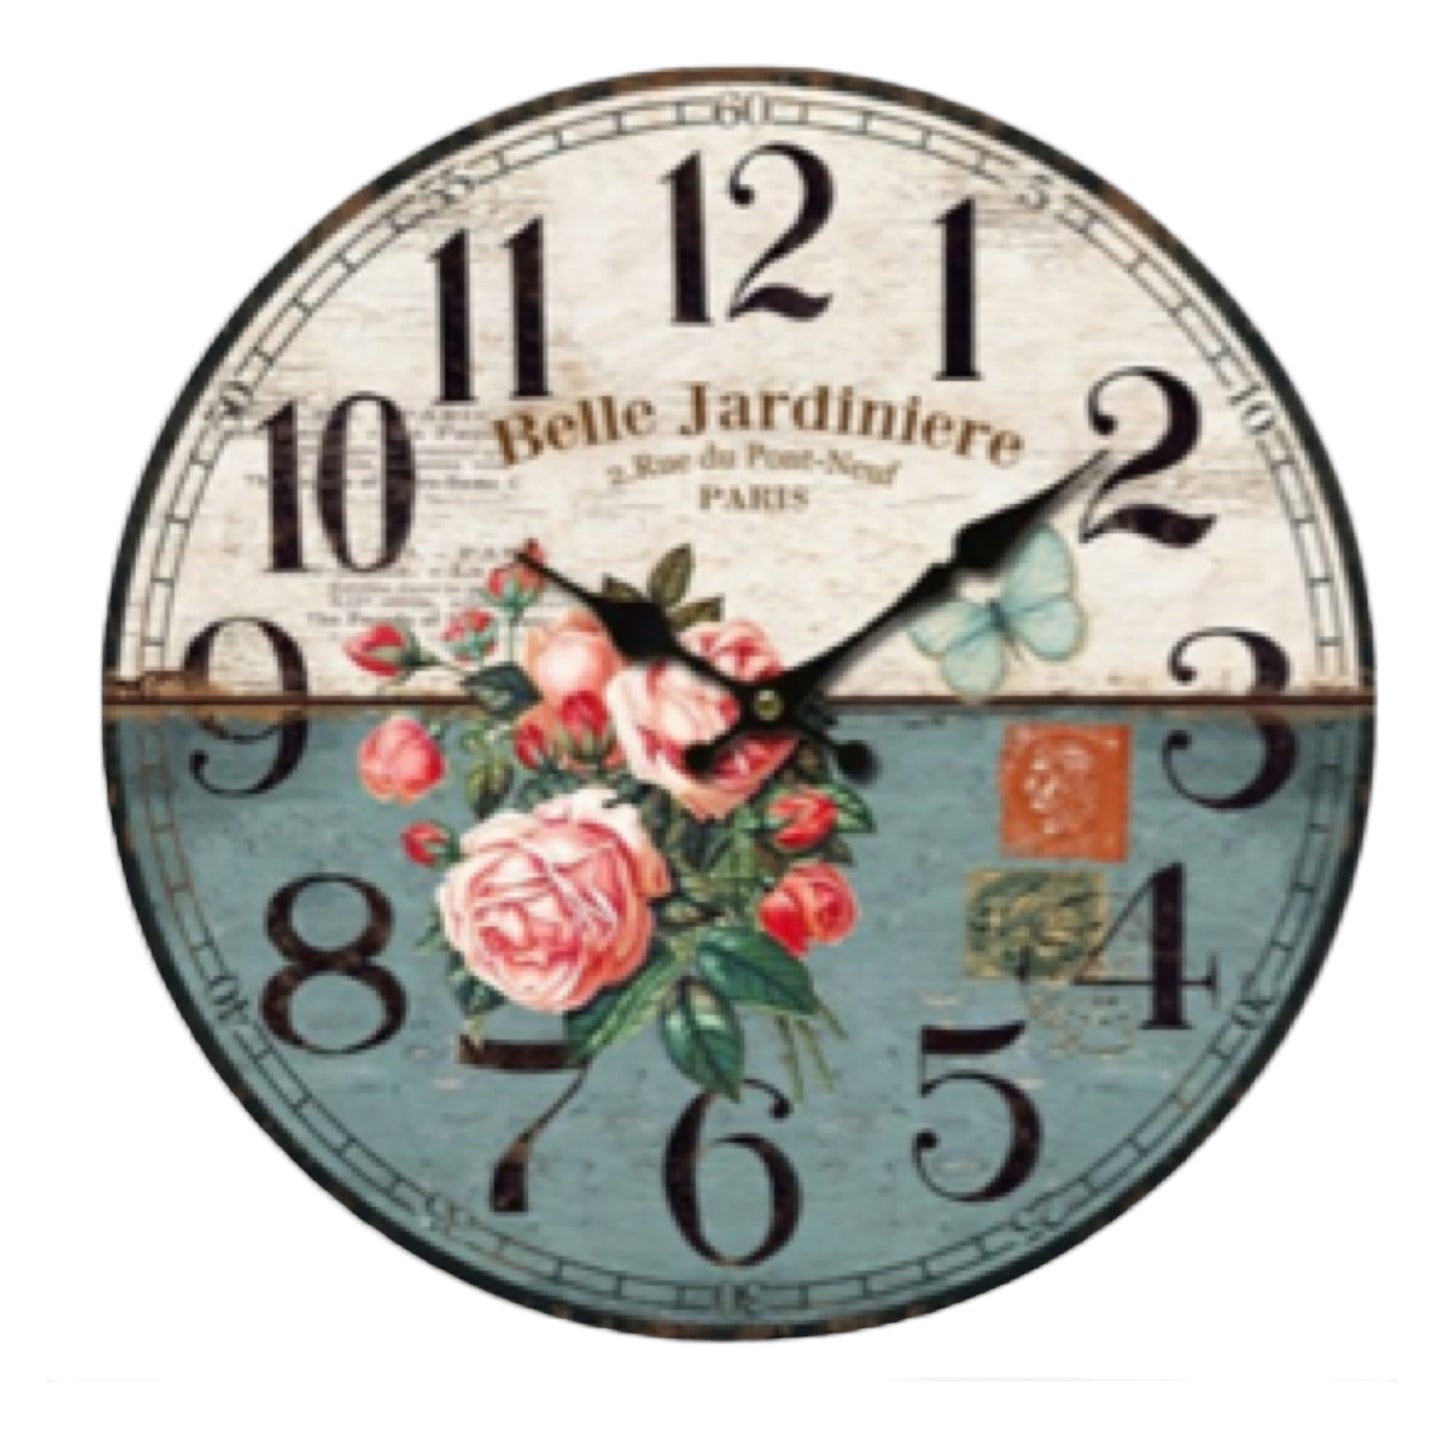 Clock Wall Rose French Country Belle 34cm - The Renmy Store Homewares & Gifts 